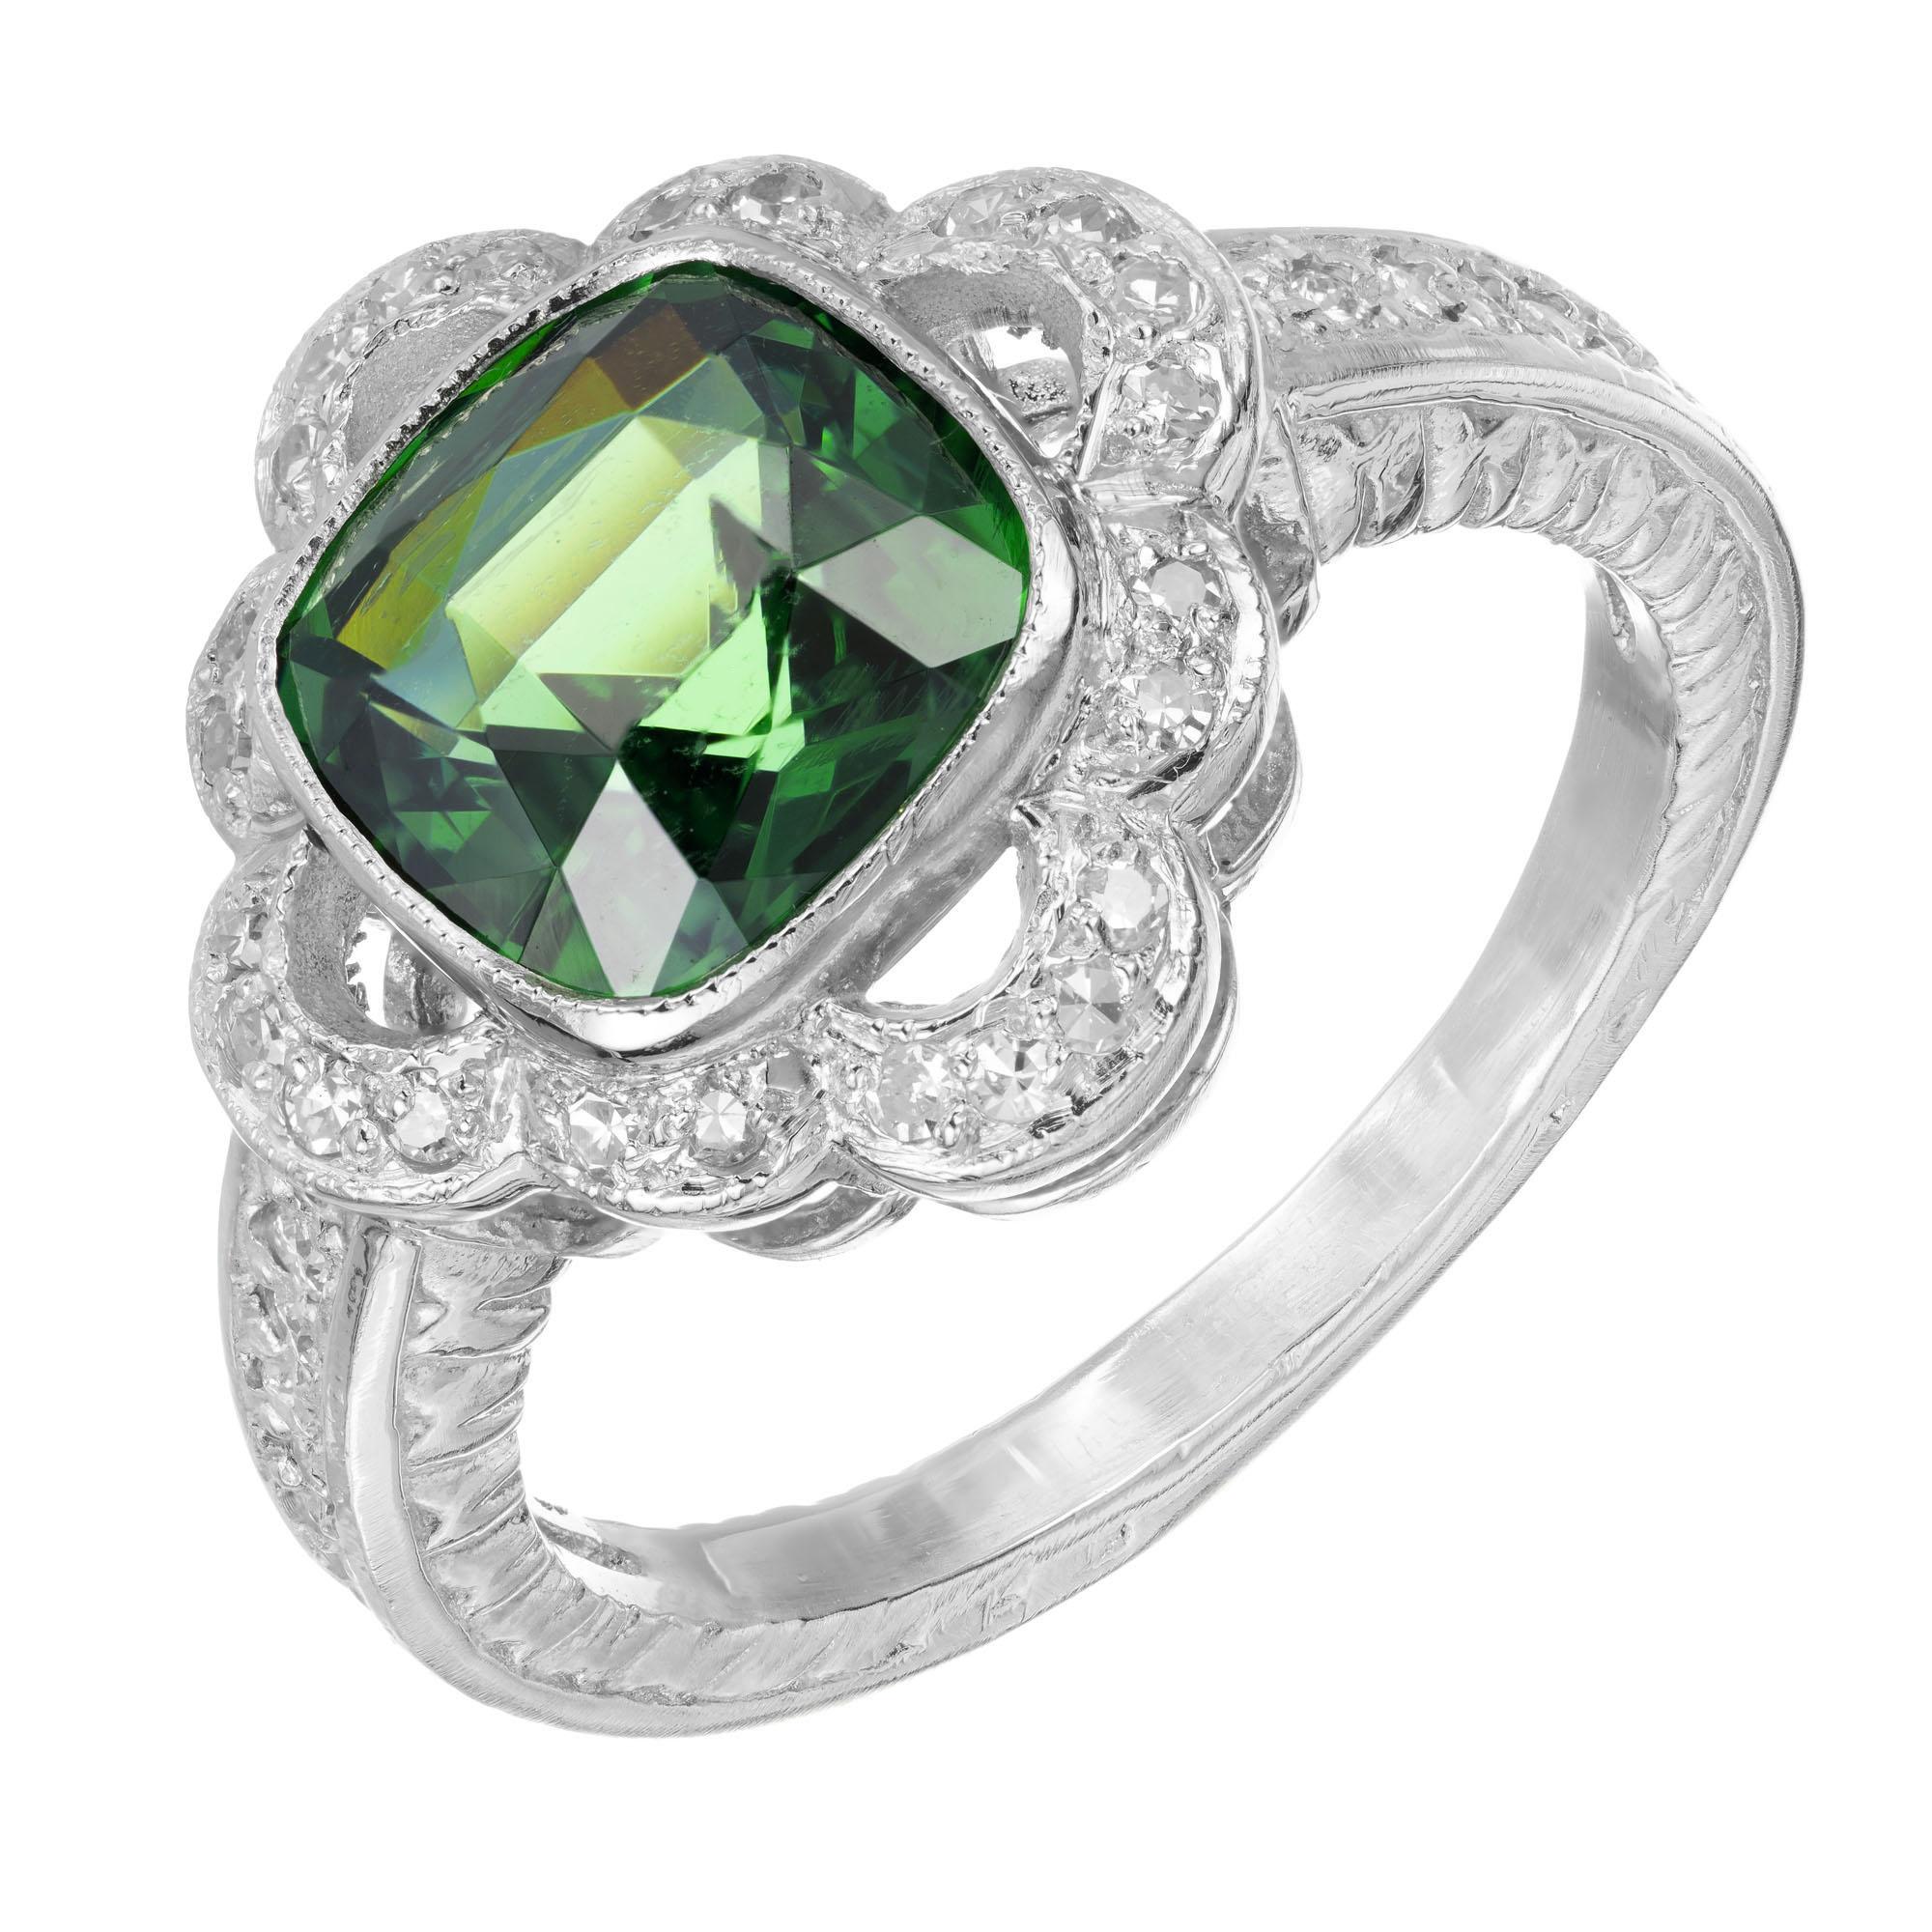 Green Zircon and diamond engagement ring. GIA natural untreated green center cushion shape Zircon, in a platinum setting with a halo of 46 round diamond's. The setting is original Platinum circa 1920-1930 with engraving and pave side diamonds. Stone